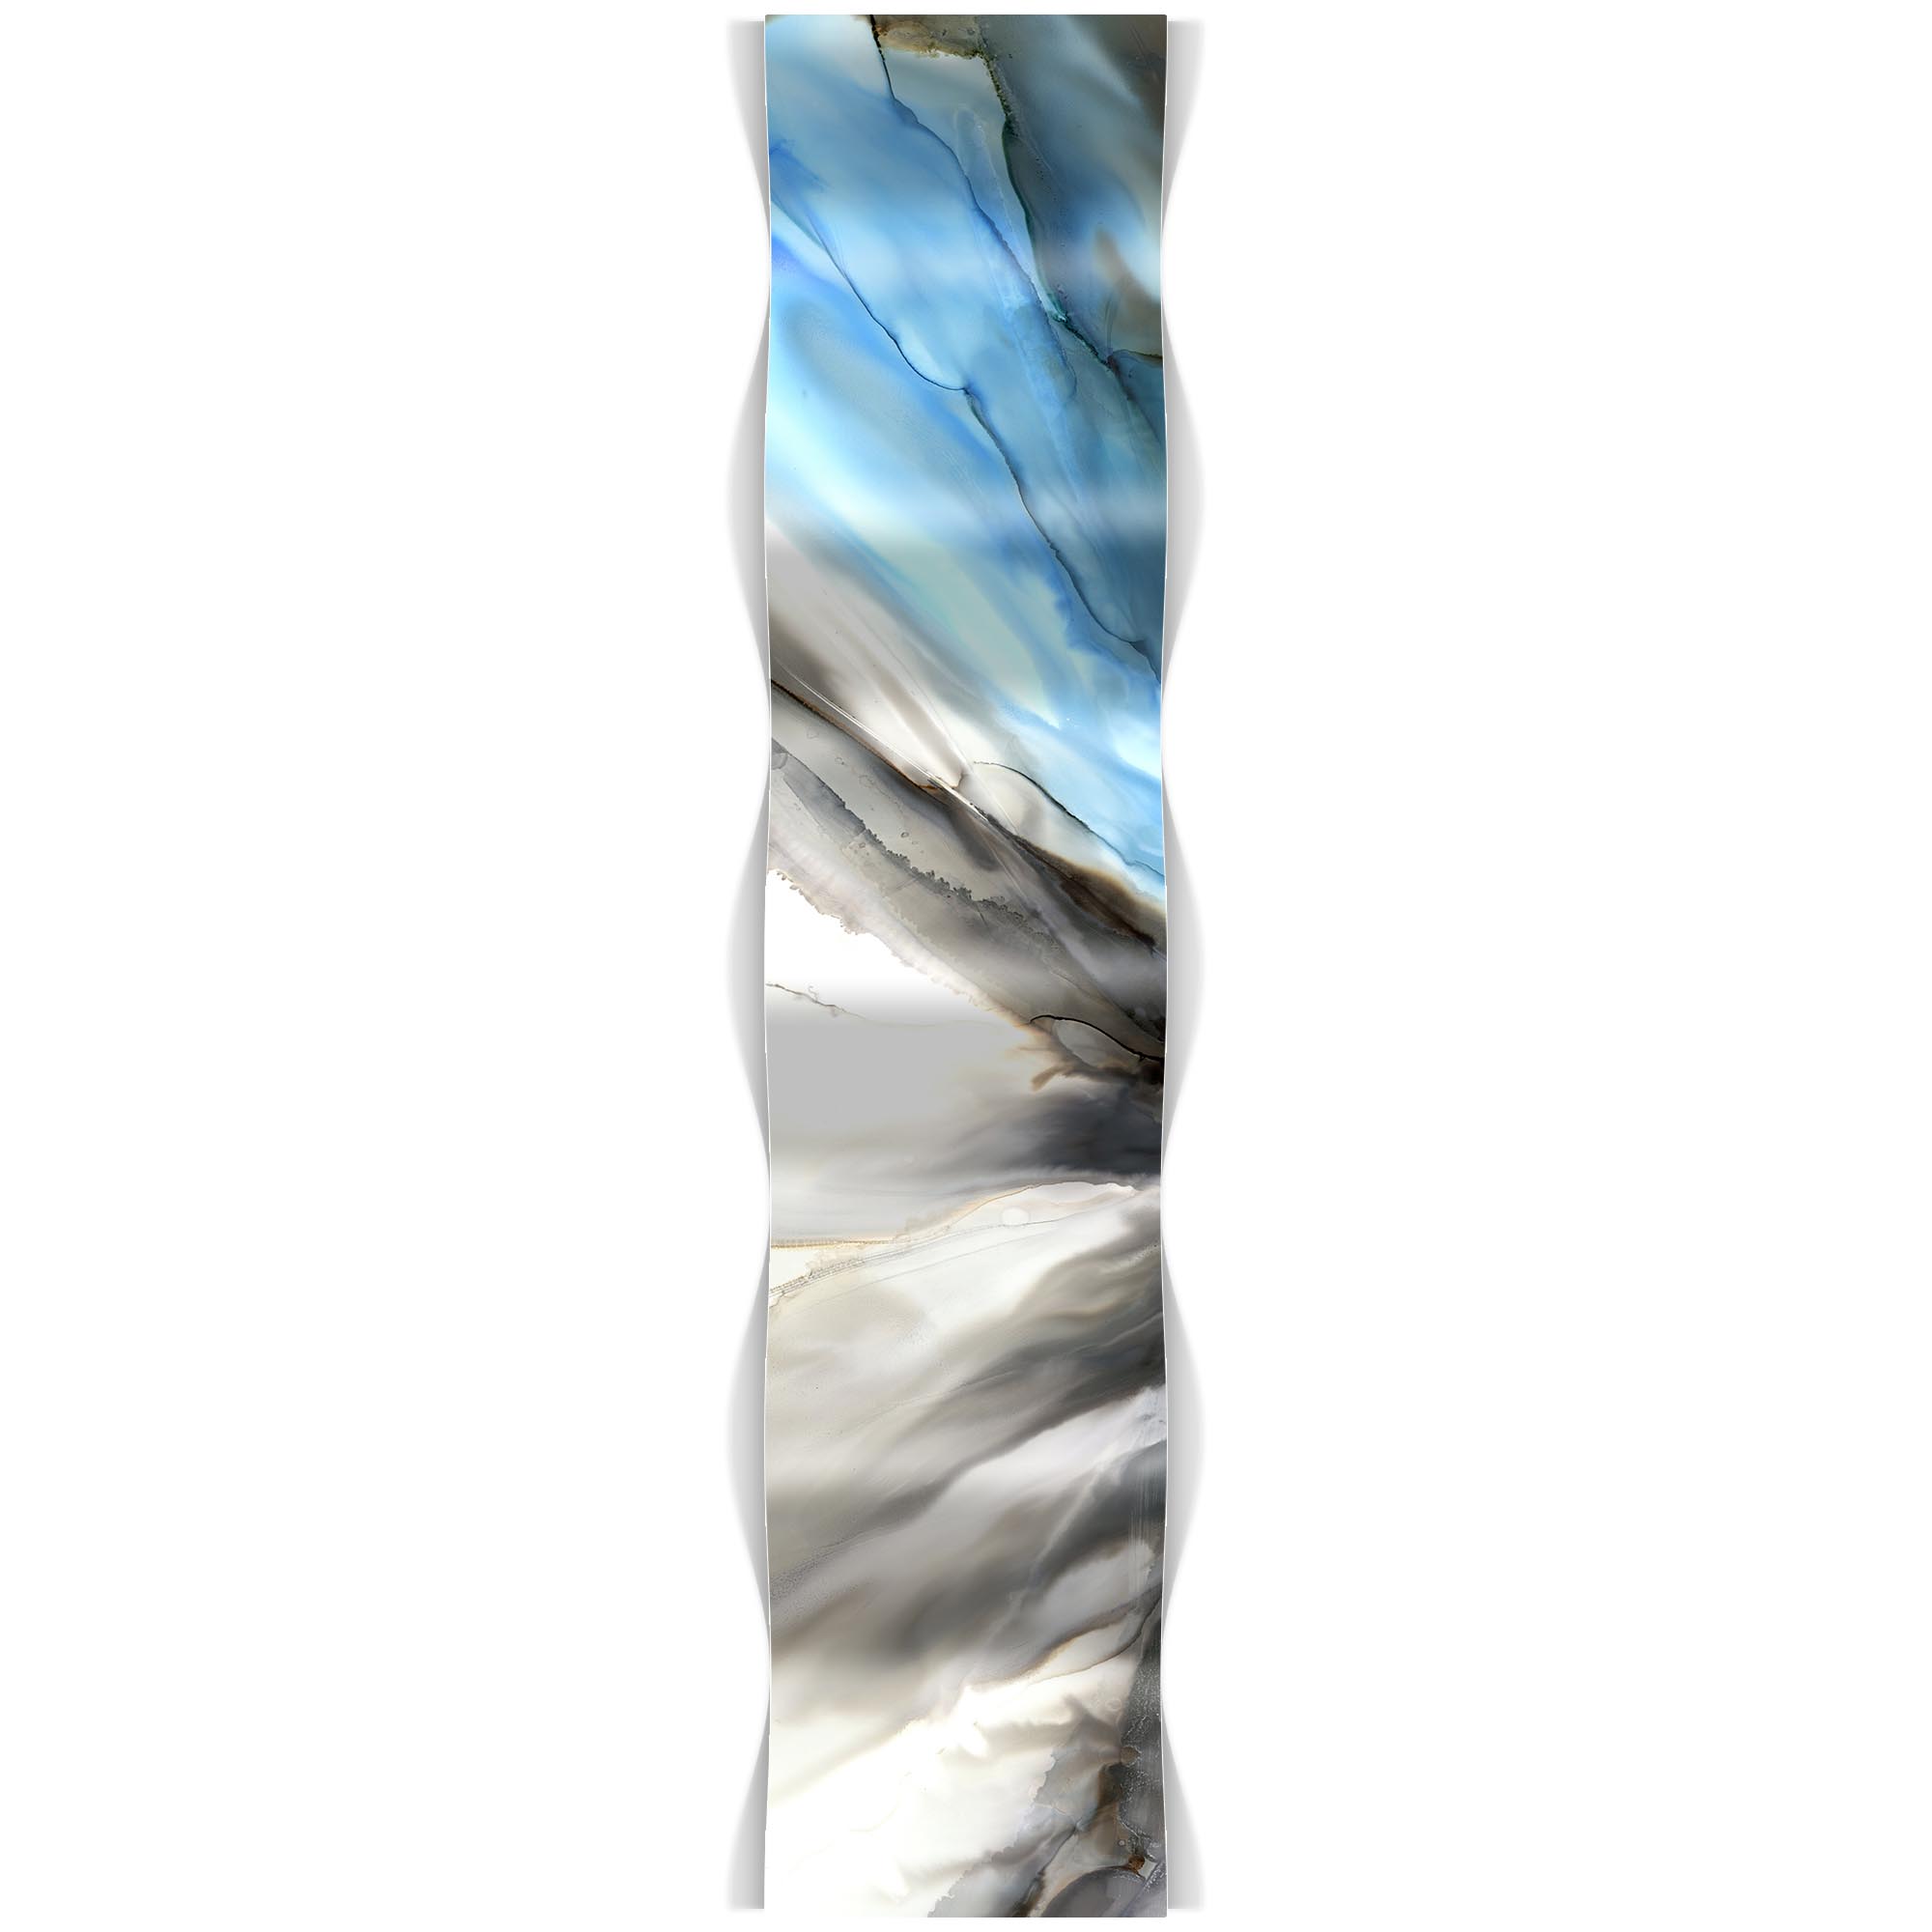 Frost Onyx Wave by NAY - Metal Wall Decor, Modern Home Decor (9.5x44in.) - Image 2